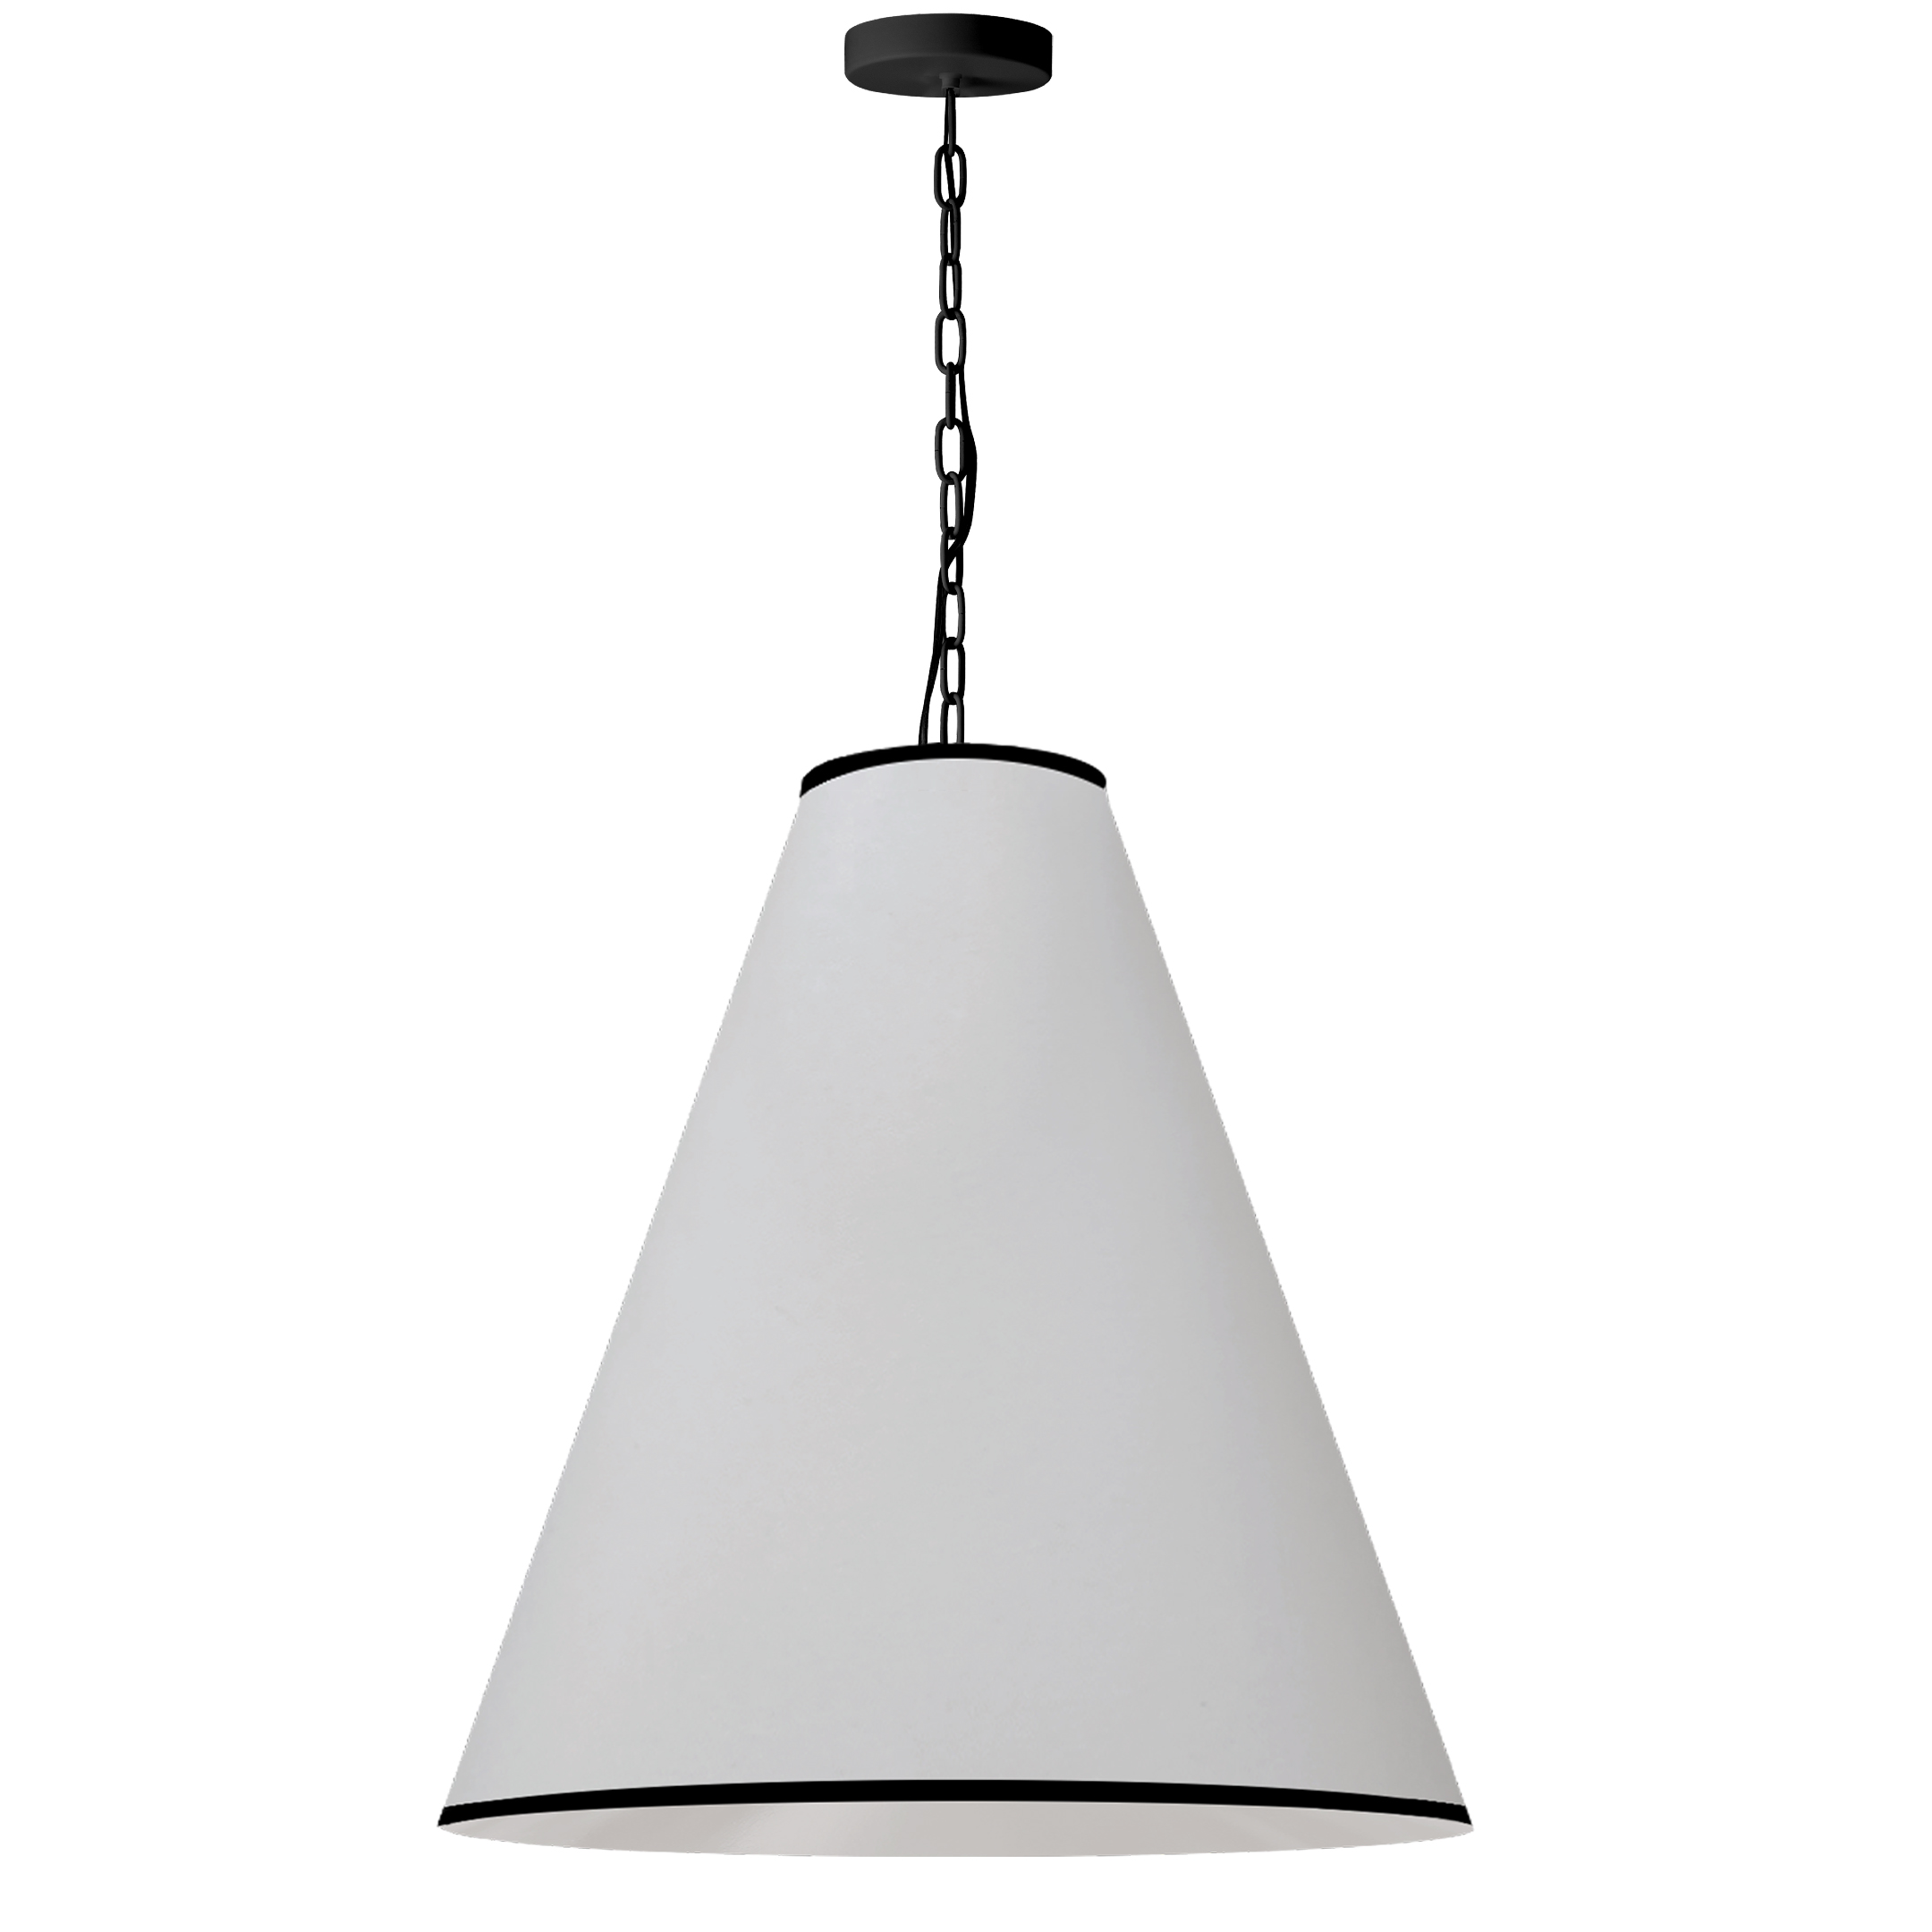 The Prym family of lighting makes a statement in refined style. With its sophisticated profile and fashionable sense of detail, it offers a versatile look incorporating elements of mid-century, modern and contemporary design. The chain drop leads to a metal frame in matte black, which extends as a trim to the fabric shade. The drum style shade features a tall tapered construction that gives it a noticeable presence in a room. Available with your choice of fabric, Prym lighting adds a focal point to your kitchen, living or dining rooms.